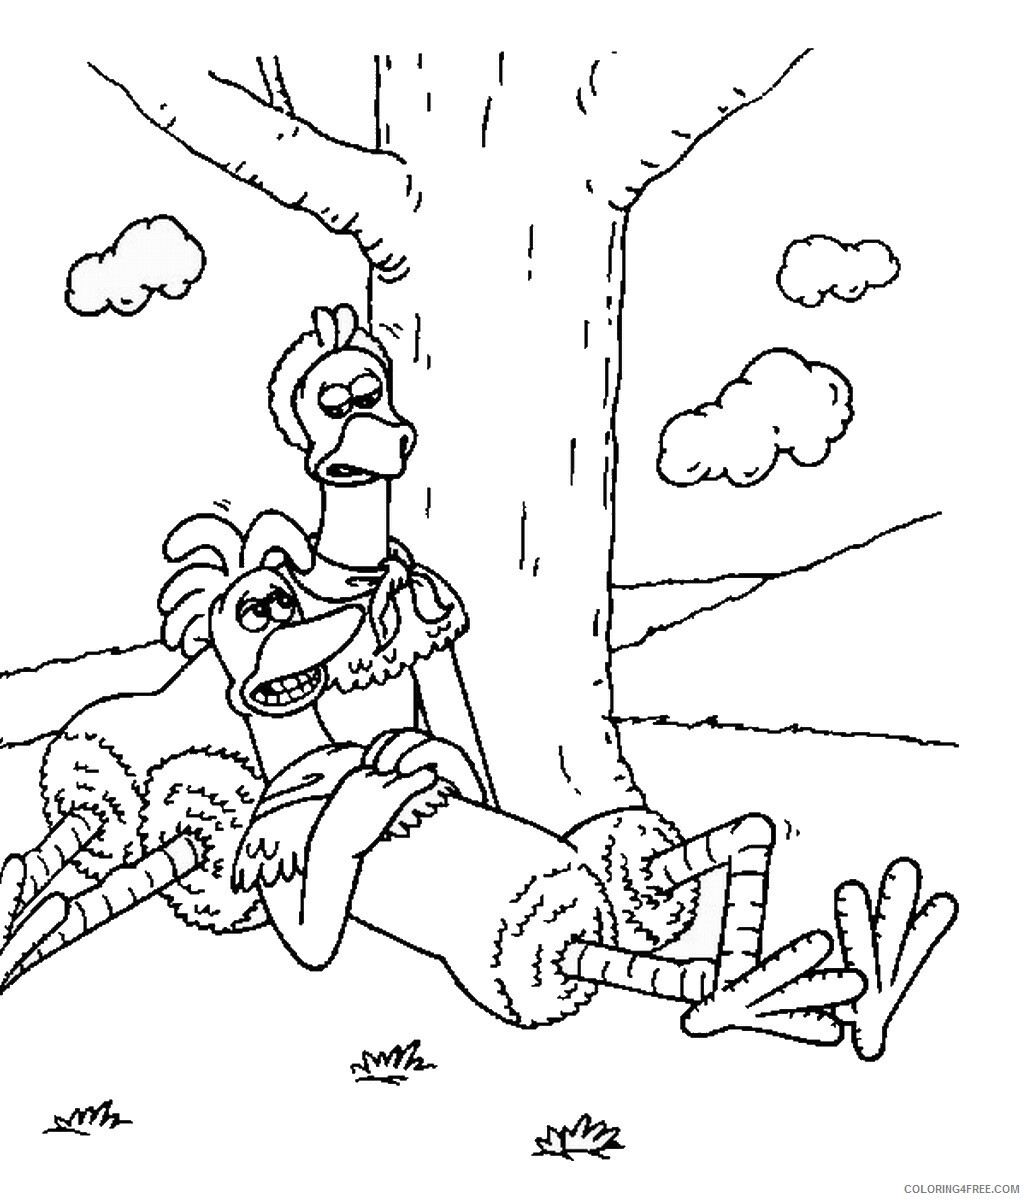 Chicken Run Coloring Pages TV Film chicken_run_cl29 Printable 2020 02128 Coloring4free